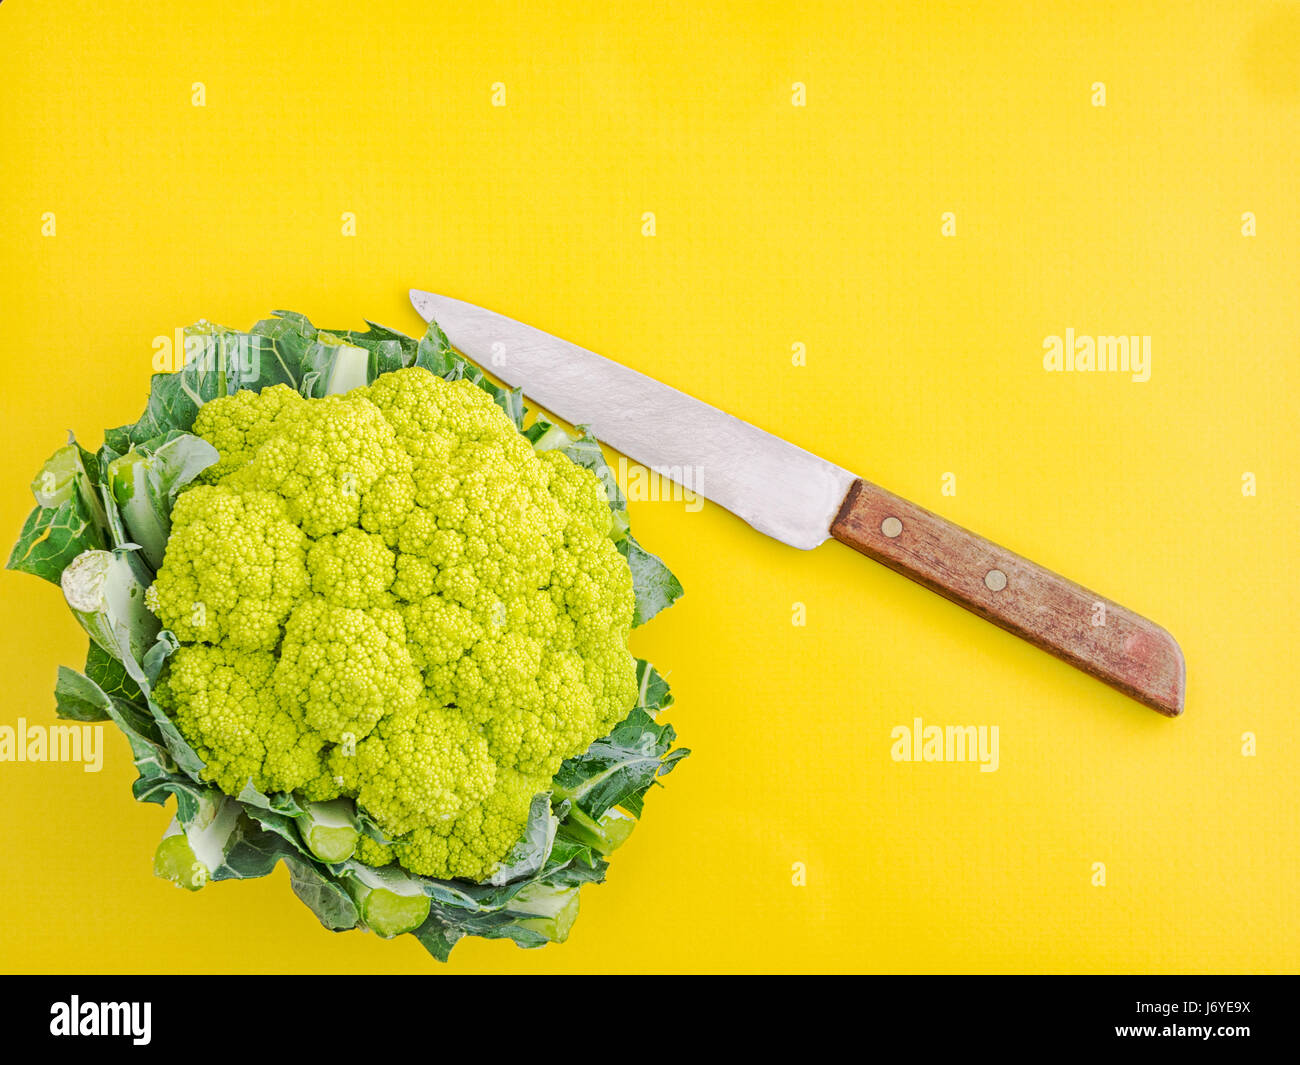 Green cauliflower. Healthy vegetable high in vitamins, minerals and micro nutrients. Stock Photo